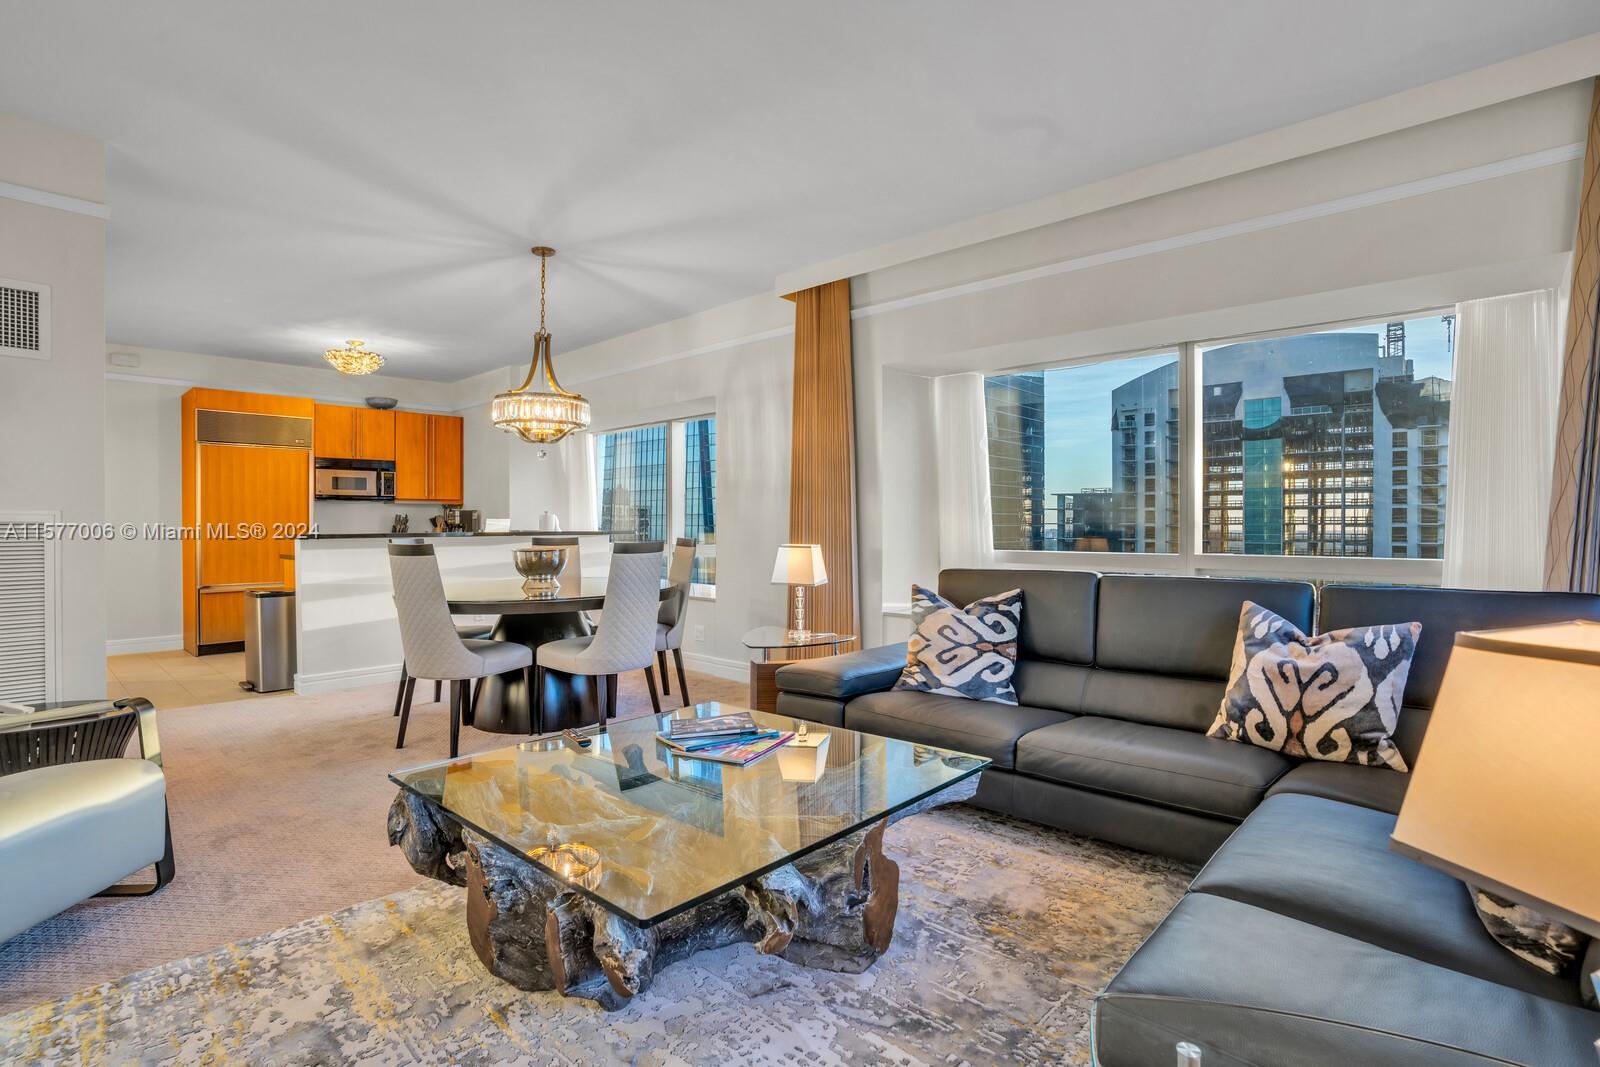 Luxurious sold fully furnished 2-bed, 2.5-bath unit at the 5-star Four Seasons hotel Brickell with breathtaking views. Features wood cabinetry, stainless steel appliances, and granite countertops in the full kitchen. Includes walk-in closets, full-size washer/dryer, storage unit, 1 parking space, and valet service. No rental restrictions—ideal for VRBO, Airbnb, or direct rentals. Enjoy world-class services amenities like Equinox gym, resort-style pools, spa, and dining options and 24-hour concierge. Conveniently located in Brickell, offering both comfort and luxury. Experience the hotel lifestyle or rent it out while away.  Great investment property. Easy to show. Call listing agent for appointment. All info on MLS is deemed to be true but not verify Owner financing available.